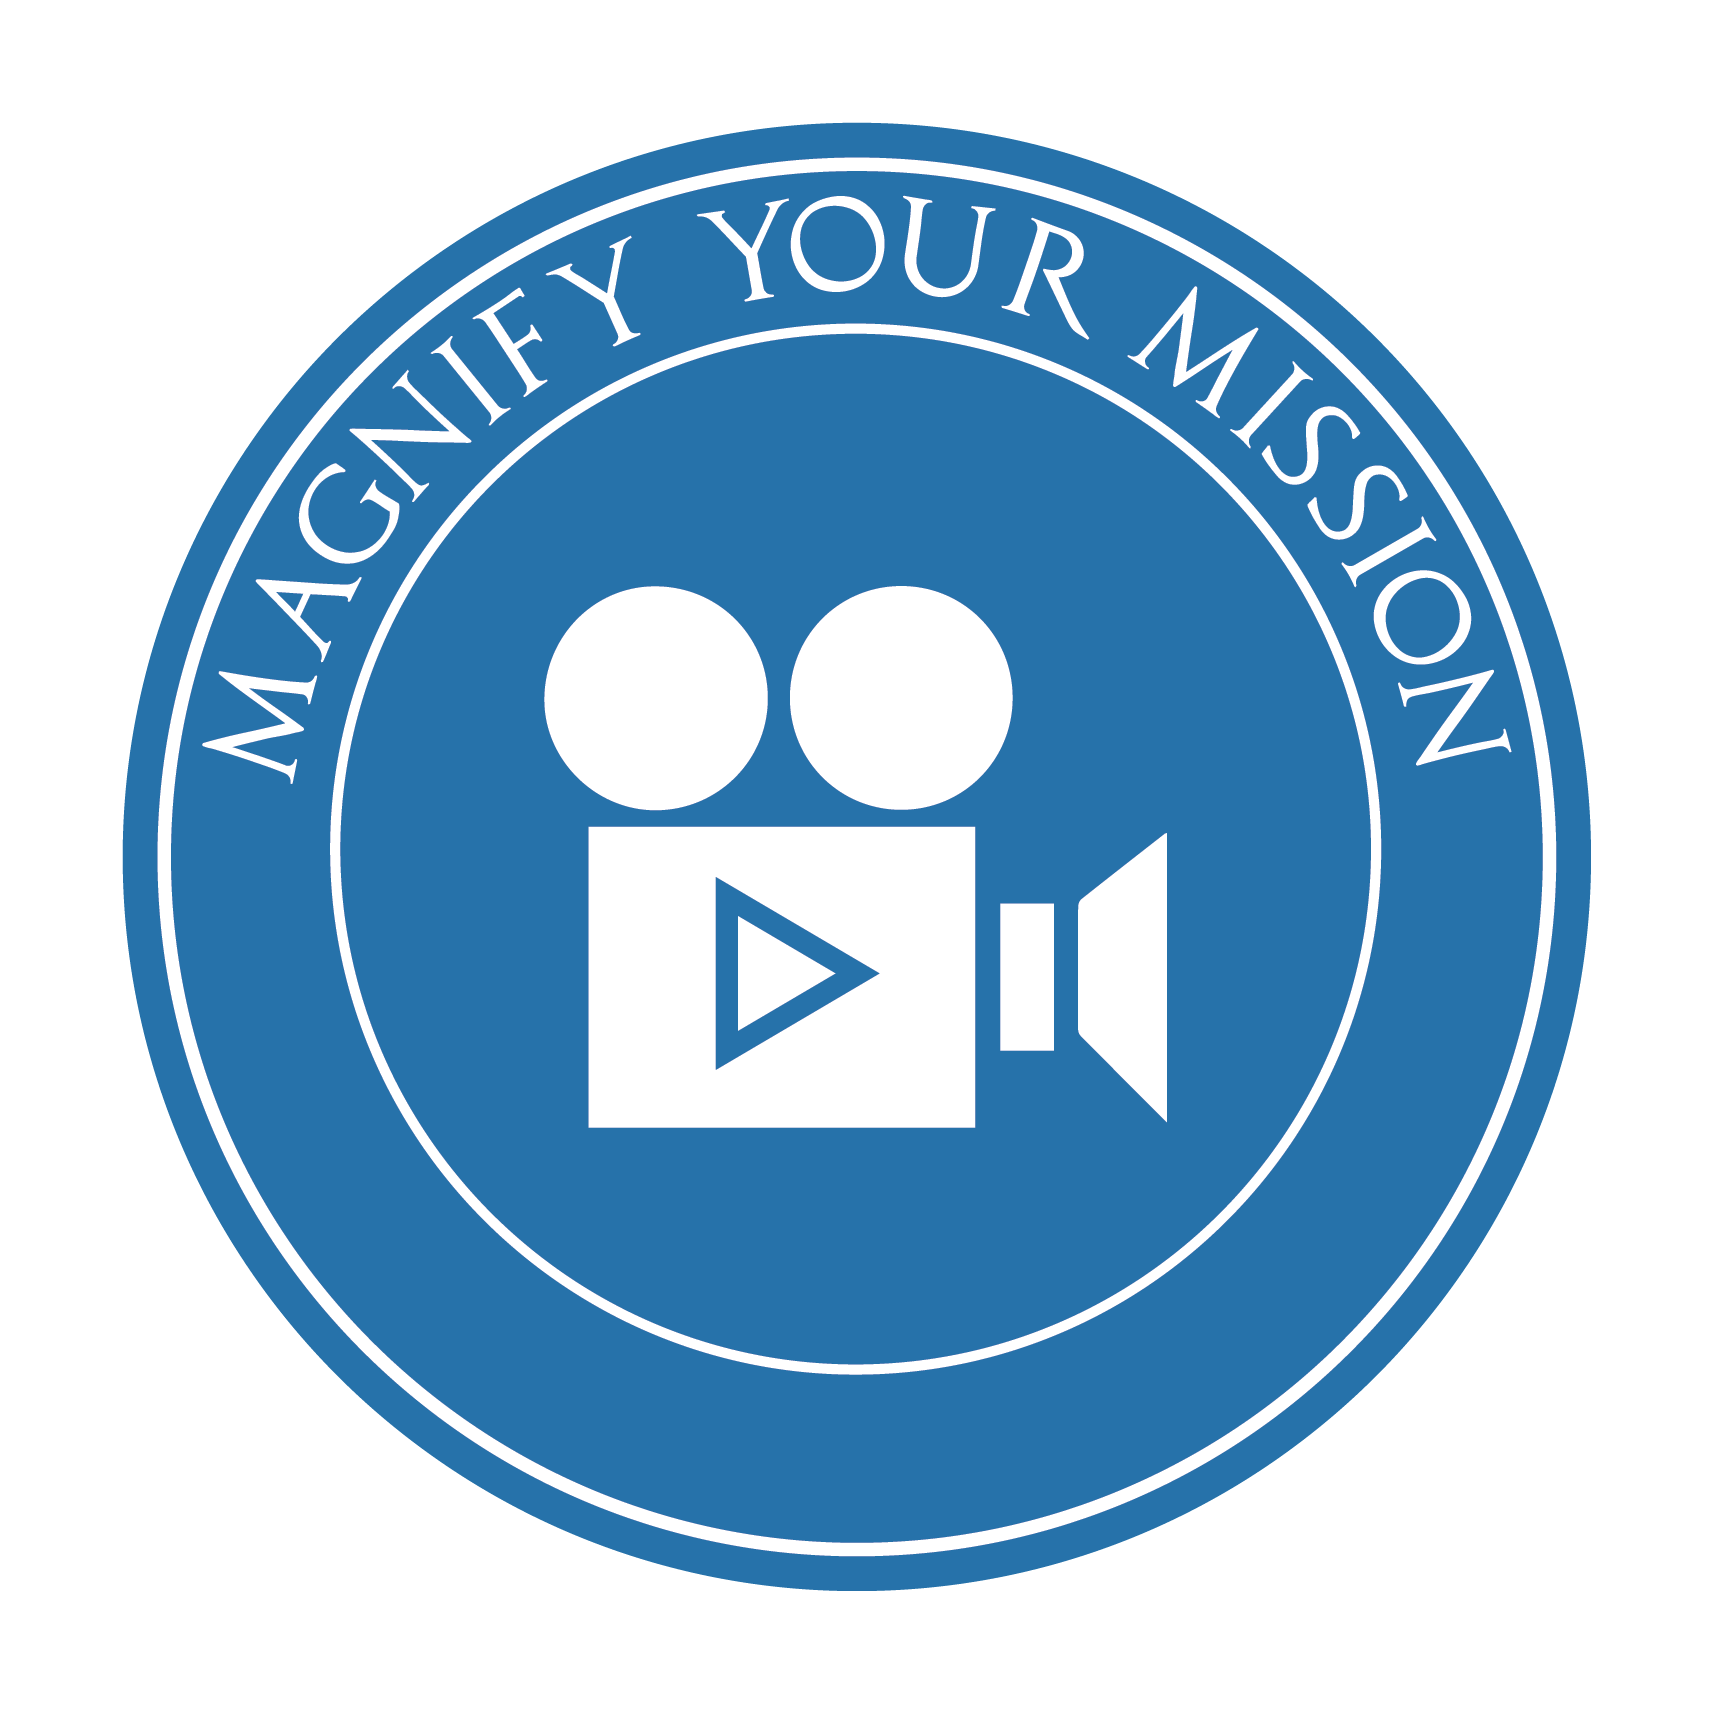 magnify your Mission